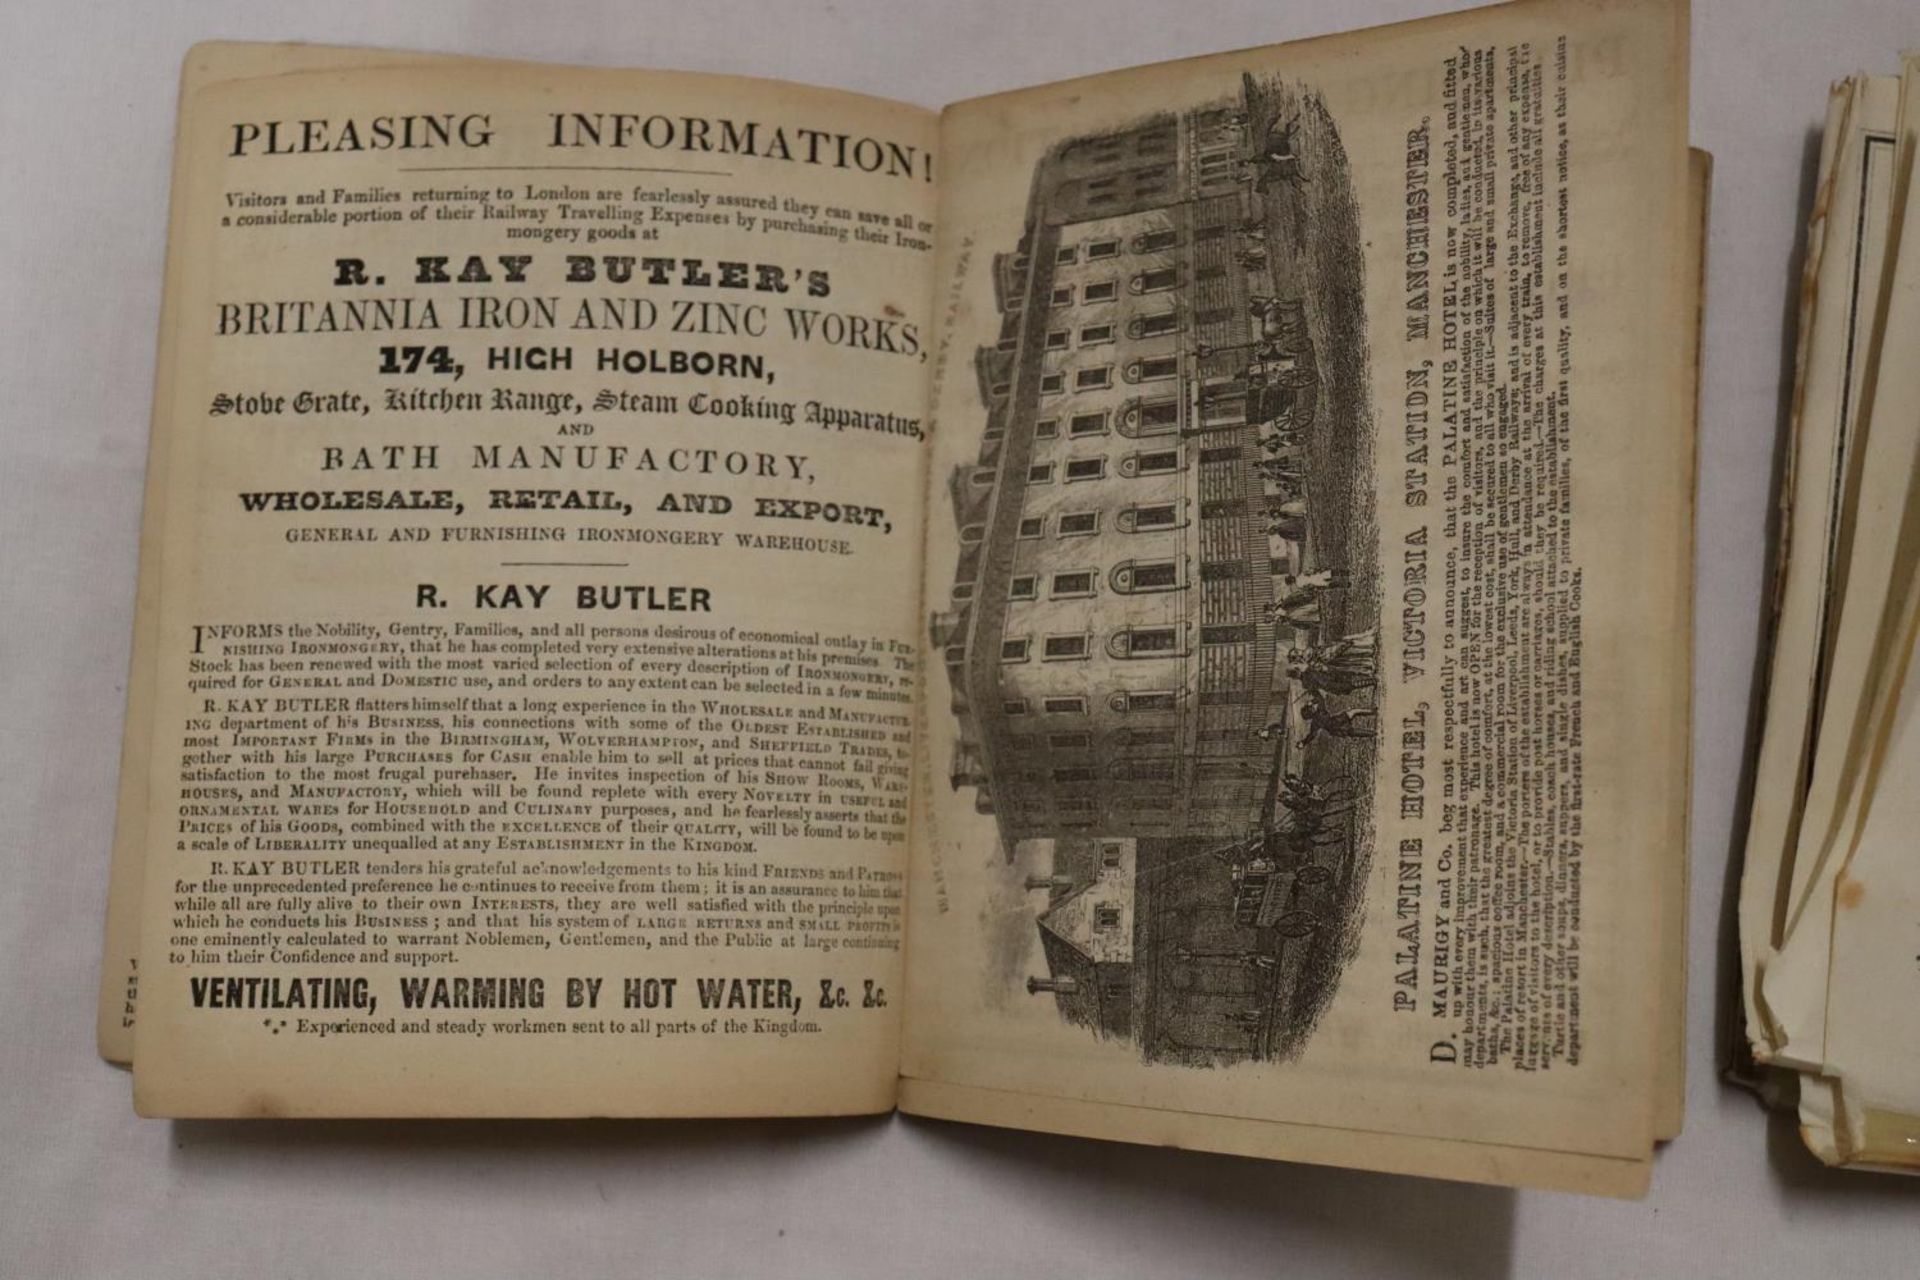 A BRADSHAWS MONTHLY RAILWAY GUIDE DATED FEBRUARY 1845, PAPERBACK VERSION AND A FOLD OUT RAILWAY MAP - Image 2 of 4